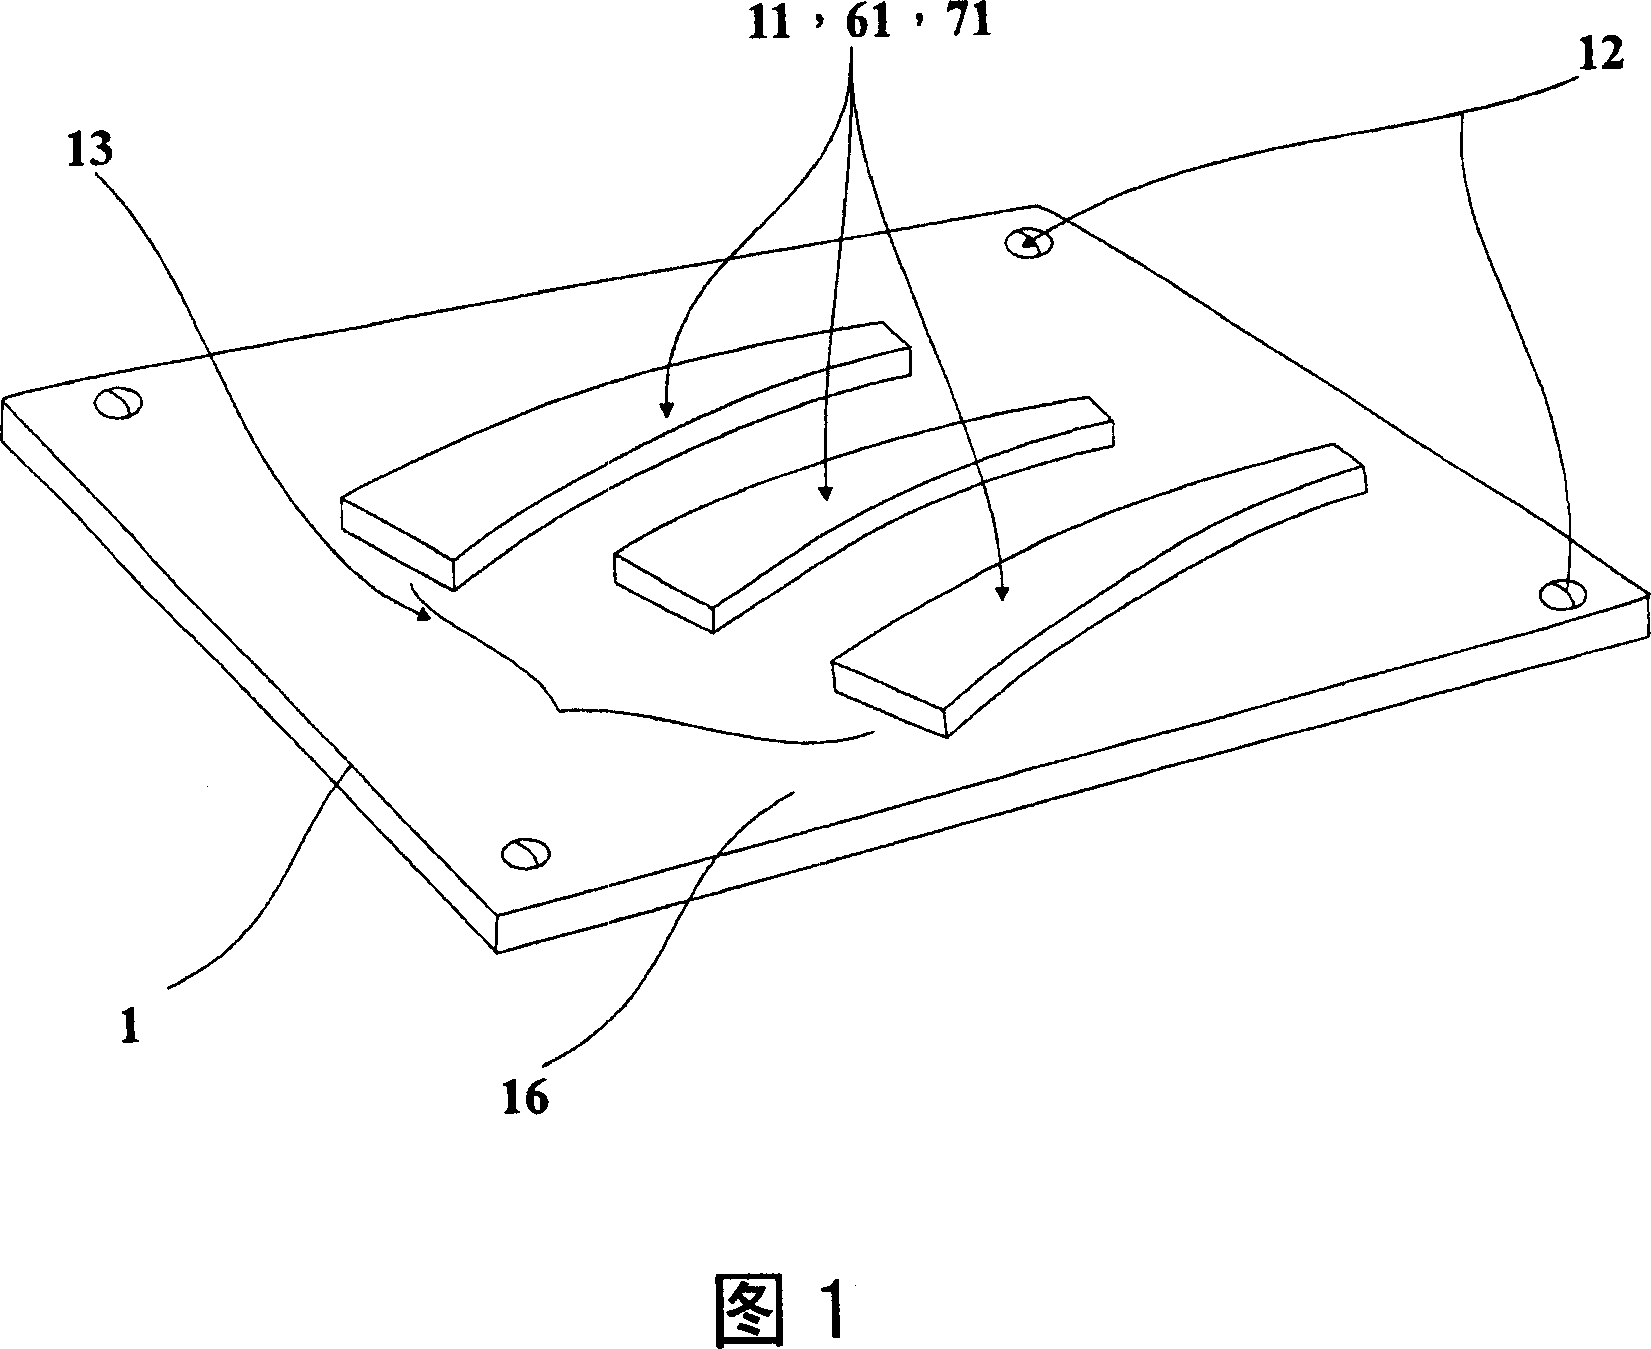 Method for preparing textured pattern presenting 3D visual effect through spray painting